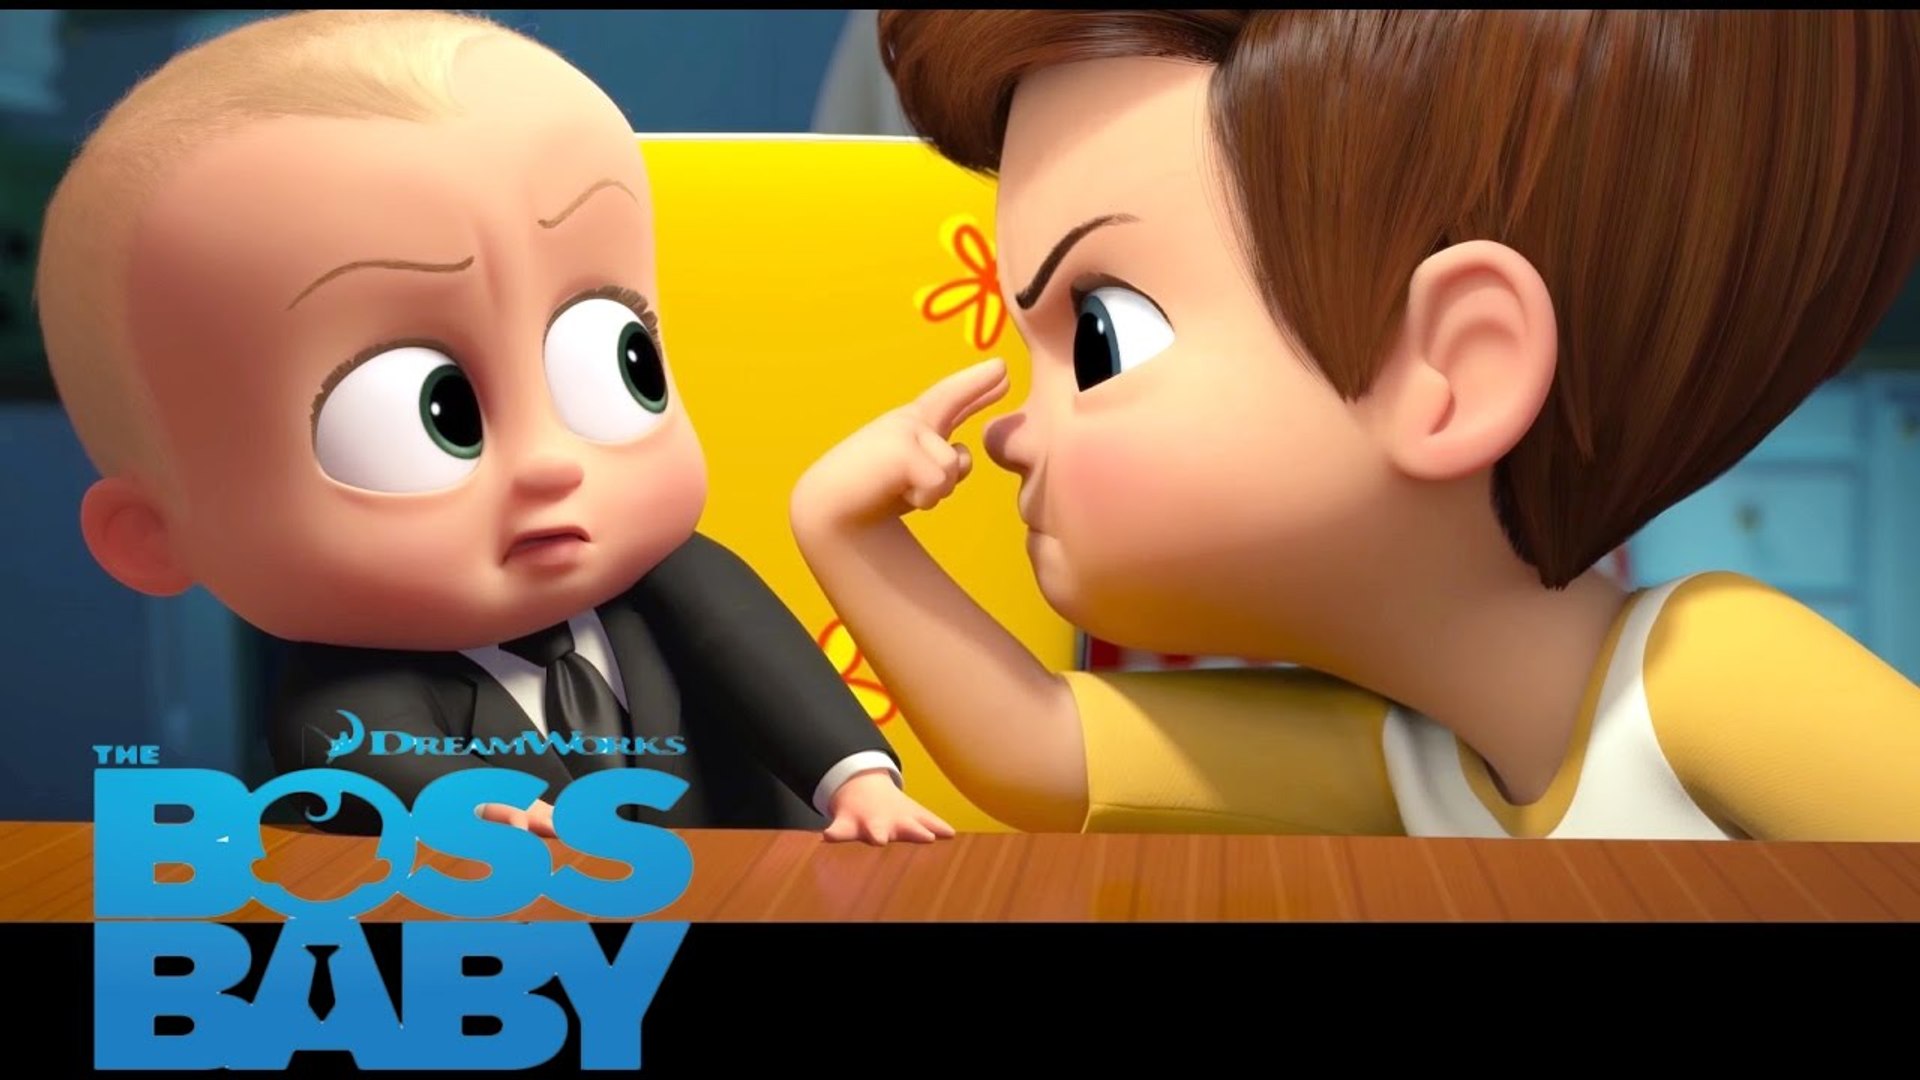 the boss baby (2017) watch online - video Dailymotion